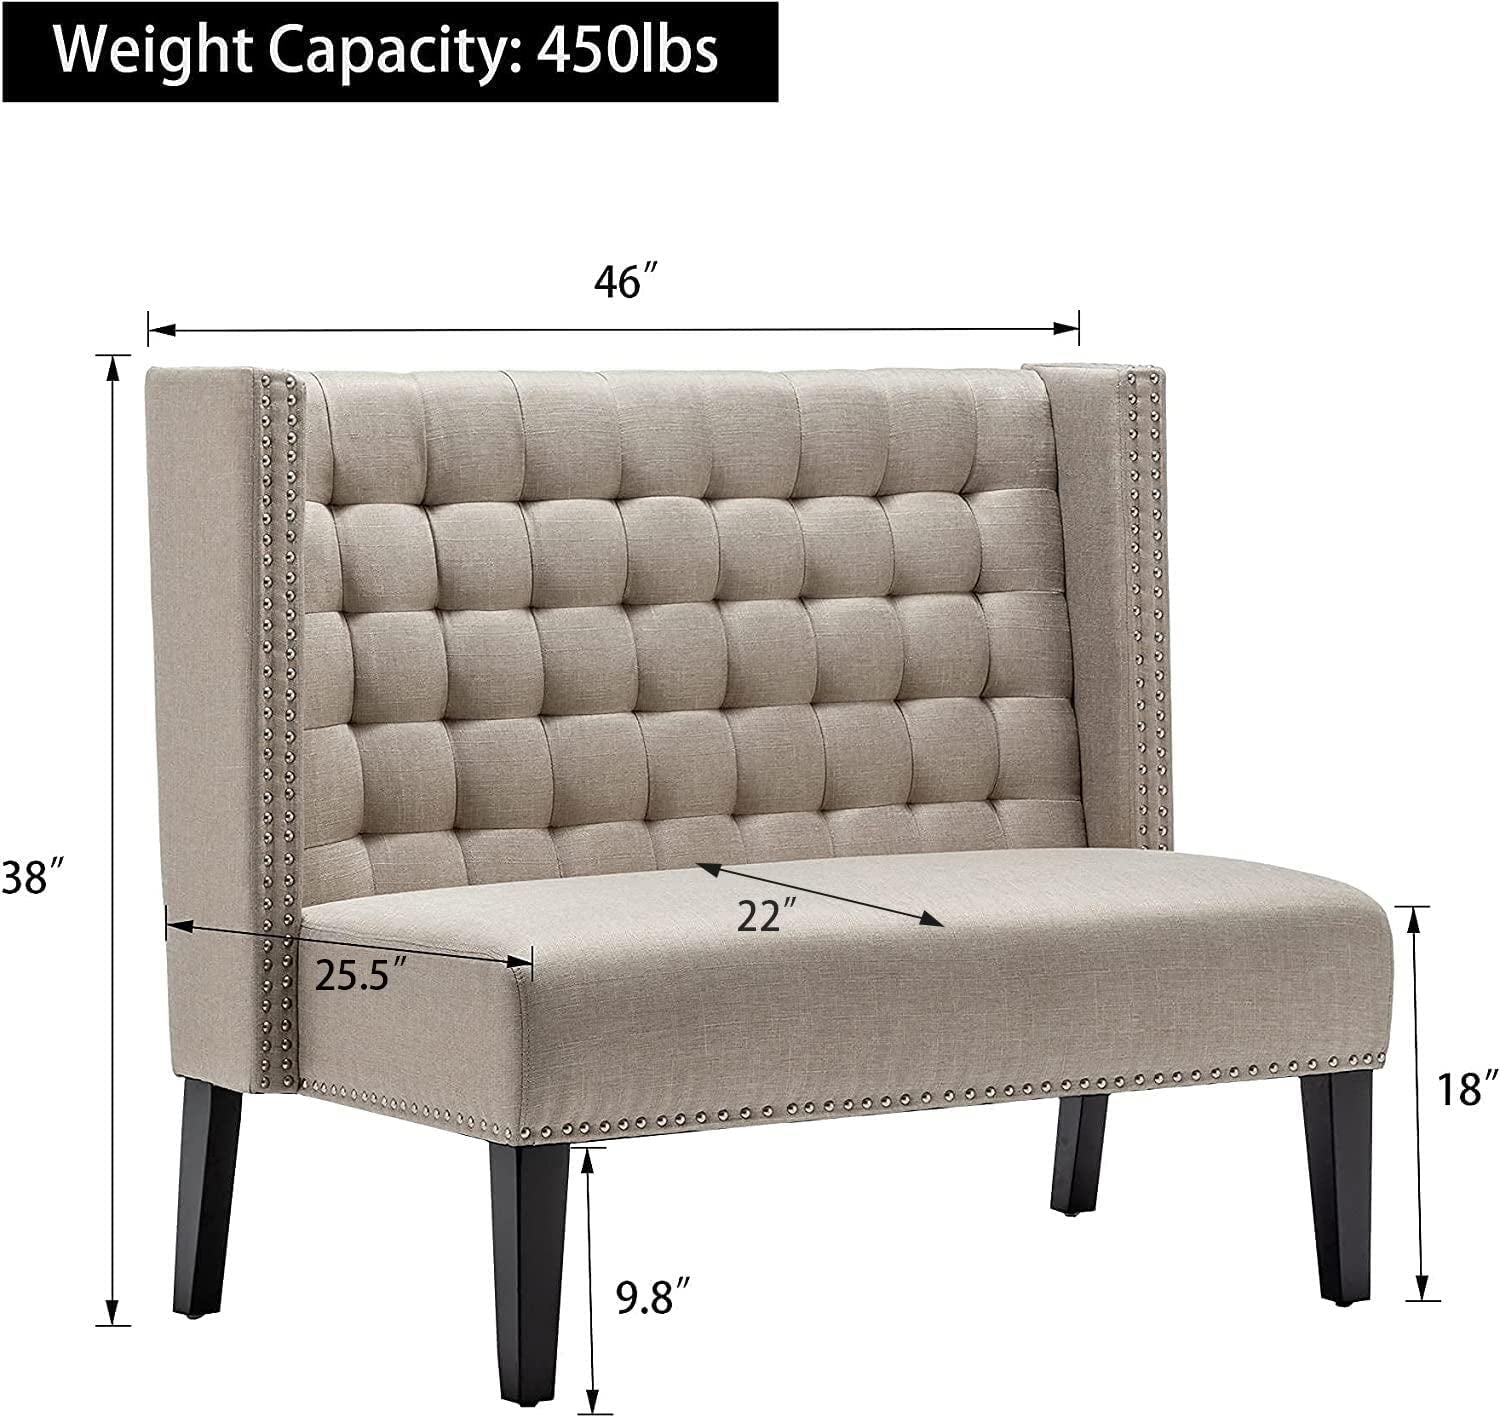 Modern Tufted Button Back Upholstered Loveseat for Dining Room Hallway or Entryway Seating (Putty 1)